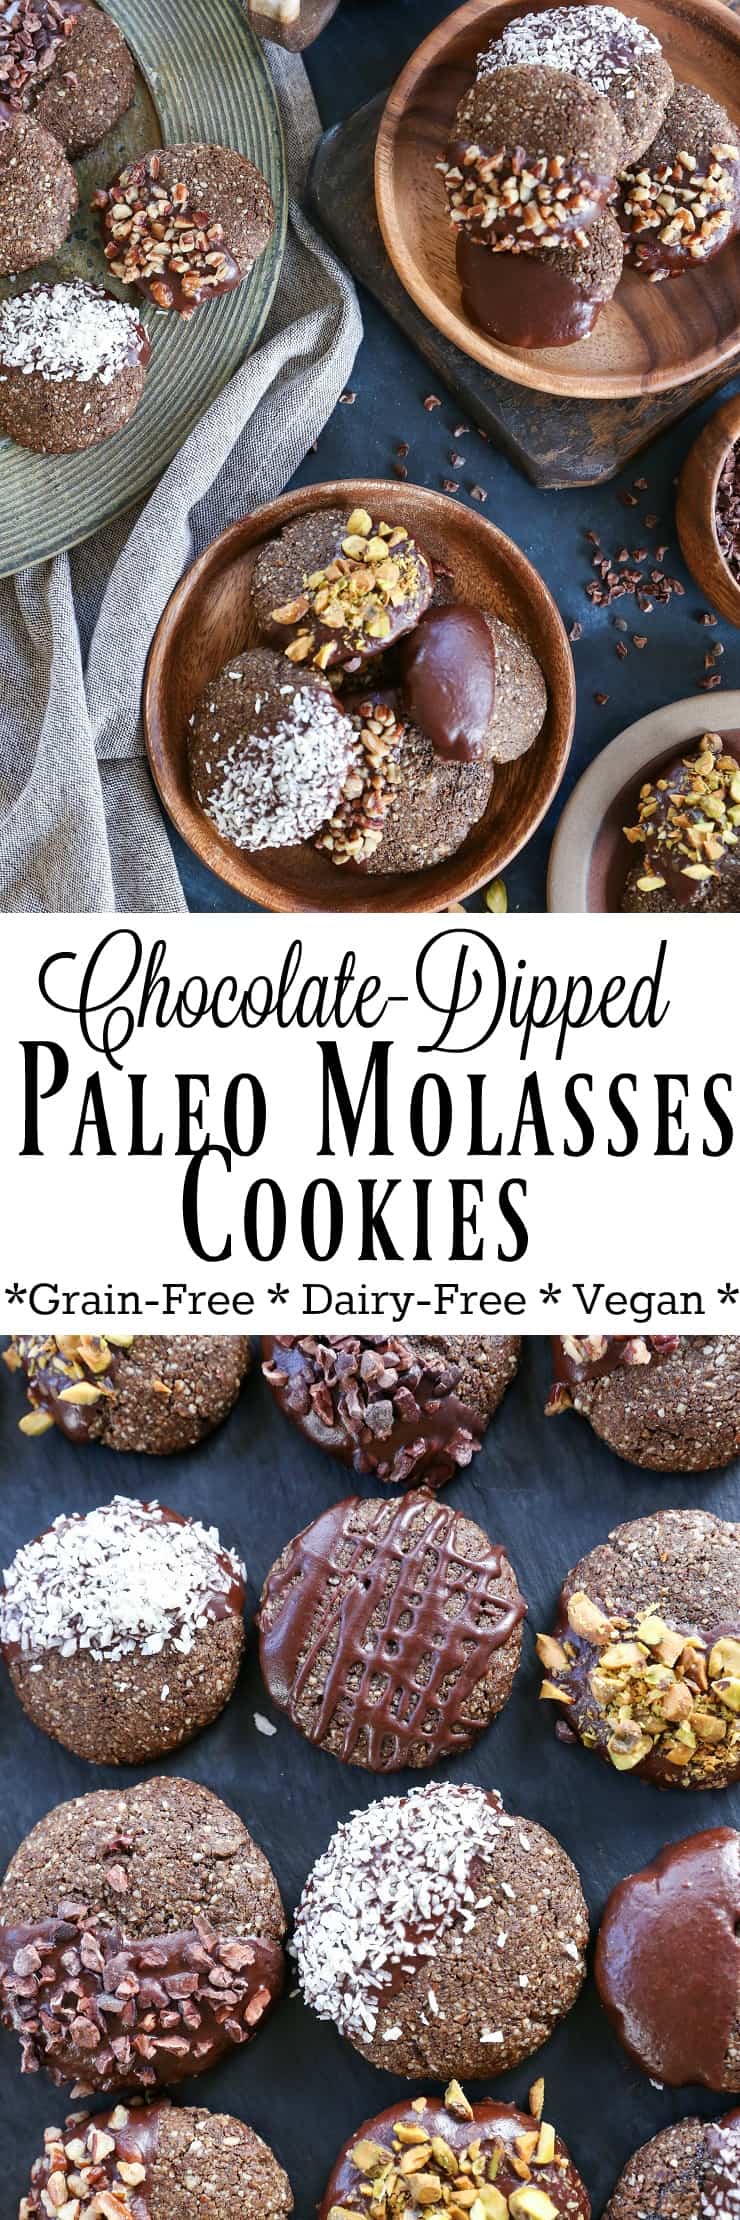 Chocolate-Dipped Molasses Cookies - paleo, vegan, grain-free, refined sugar-free, and healthy! The perfect Christmas cookie